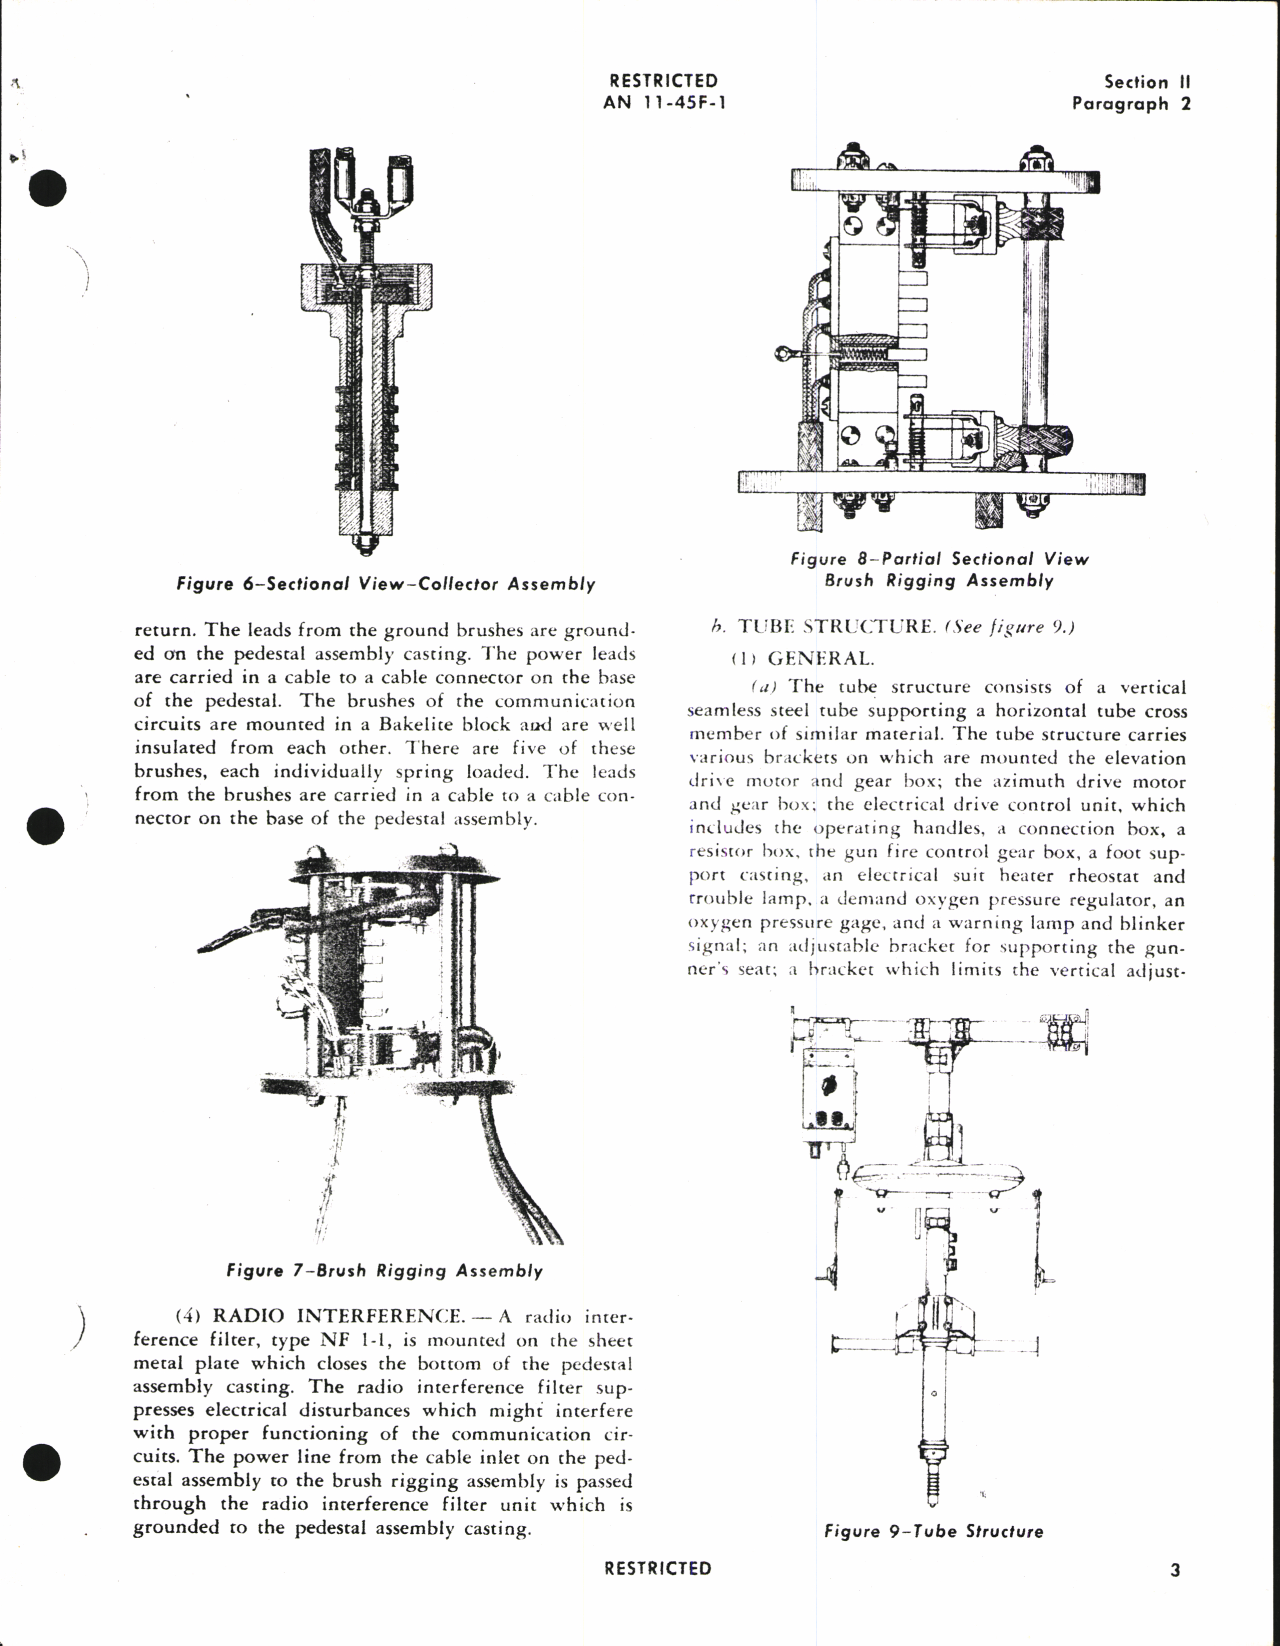 Sample page 7 from AirCorps Library document: Handbook of Instructions with Parts Catalog for Training Turret Type A-8